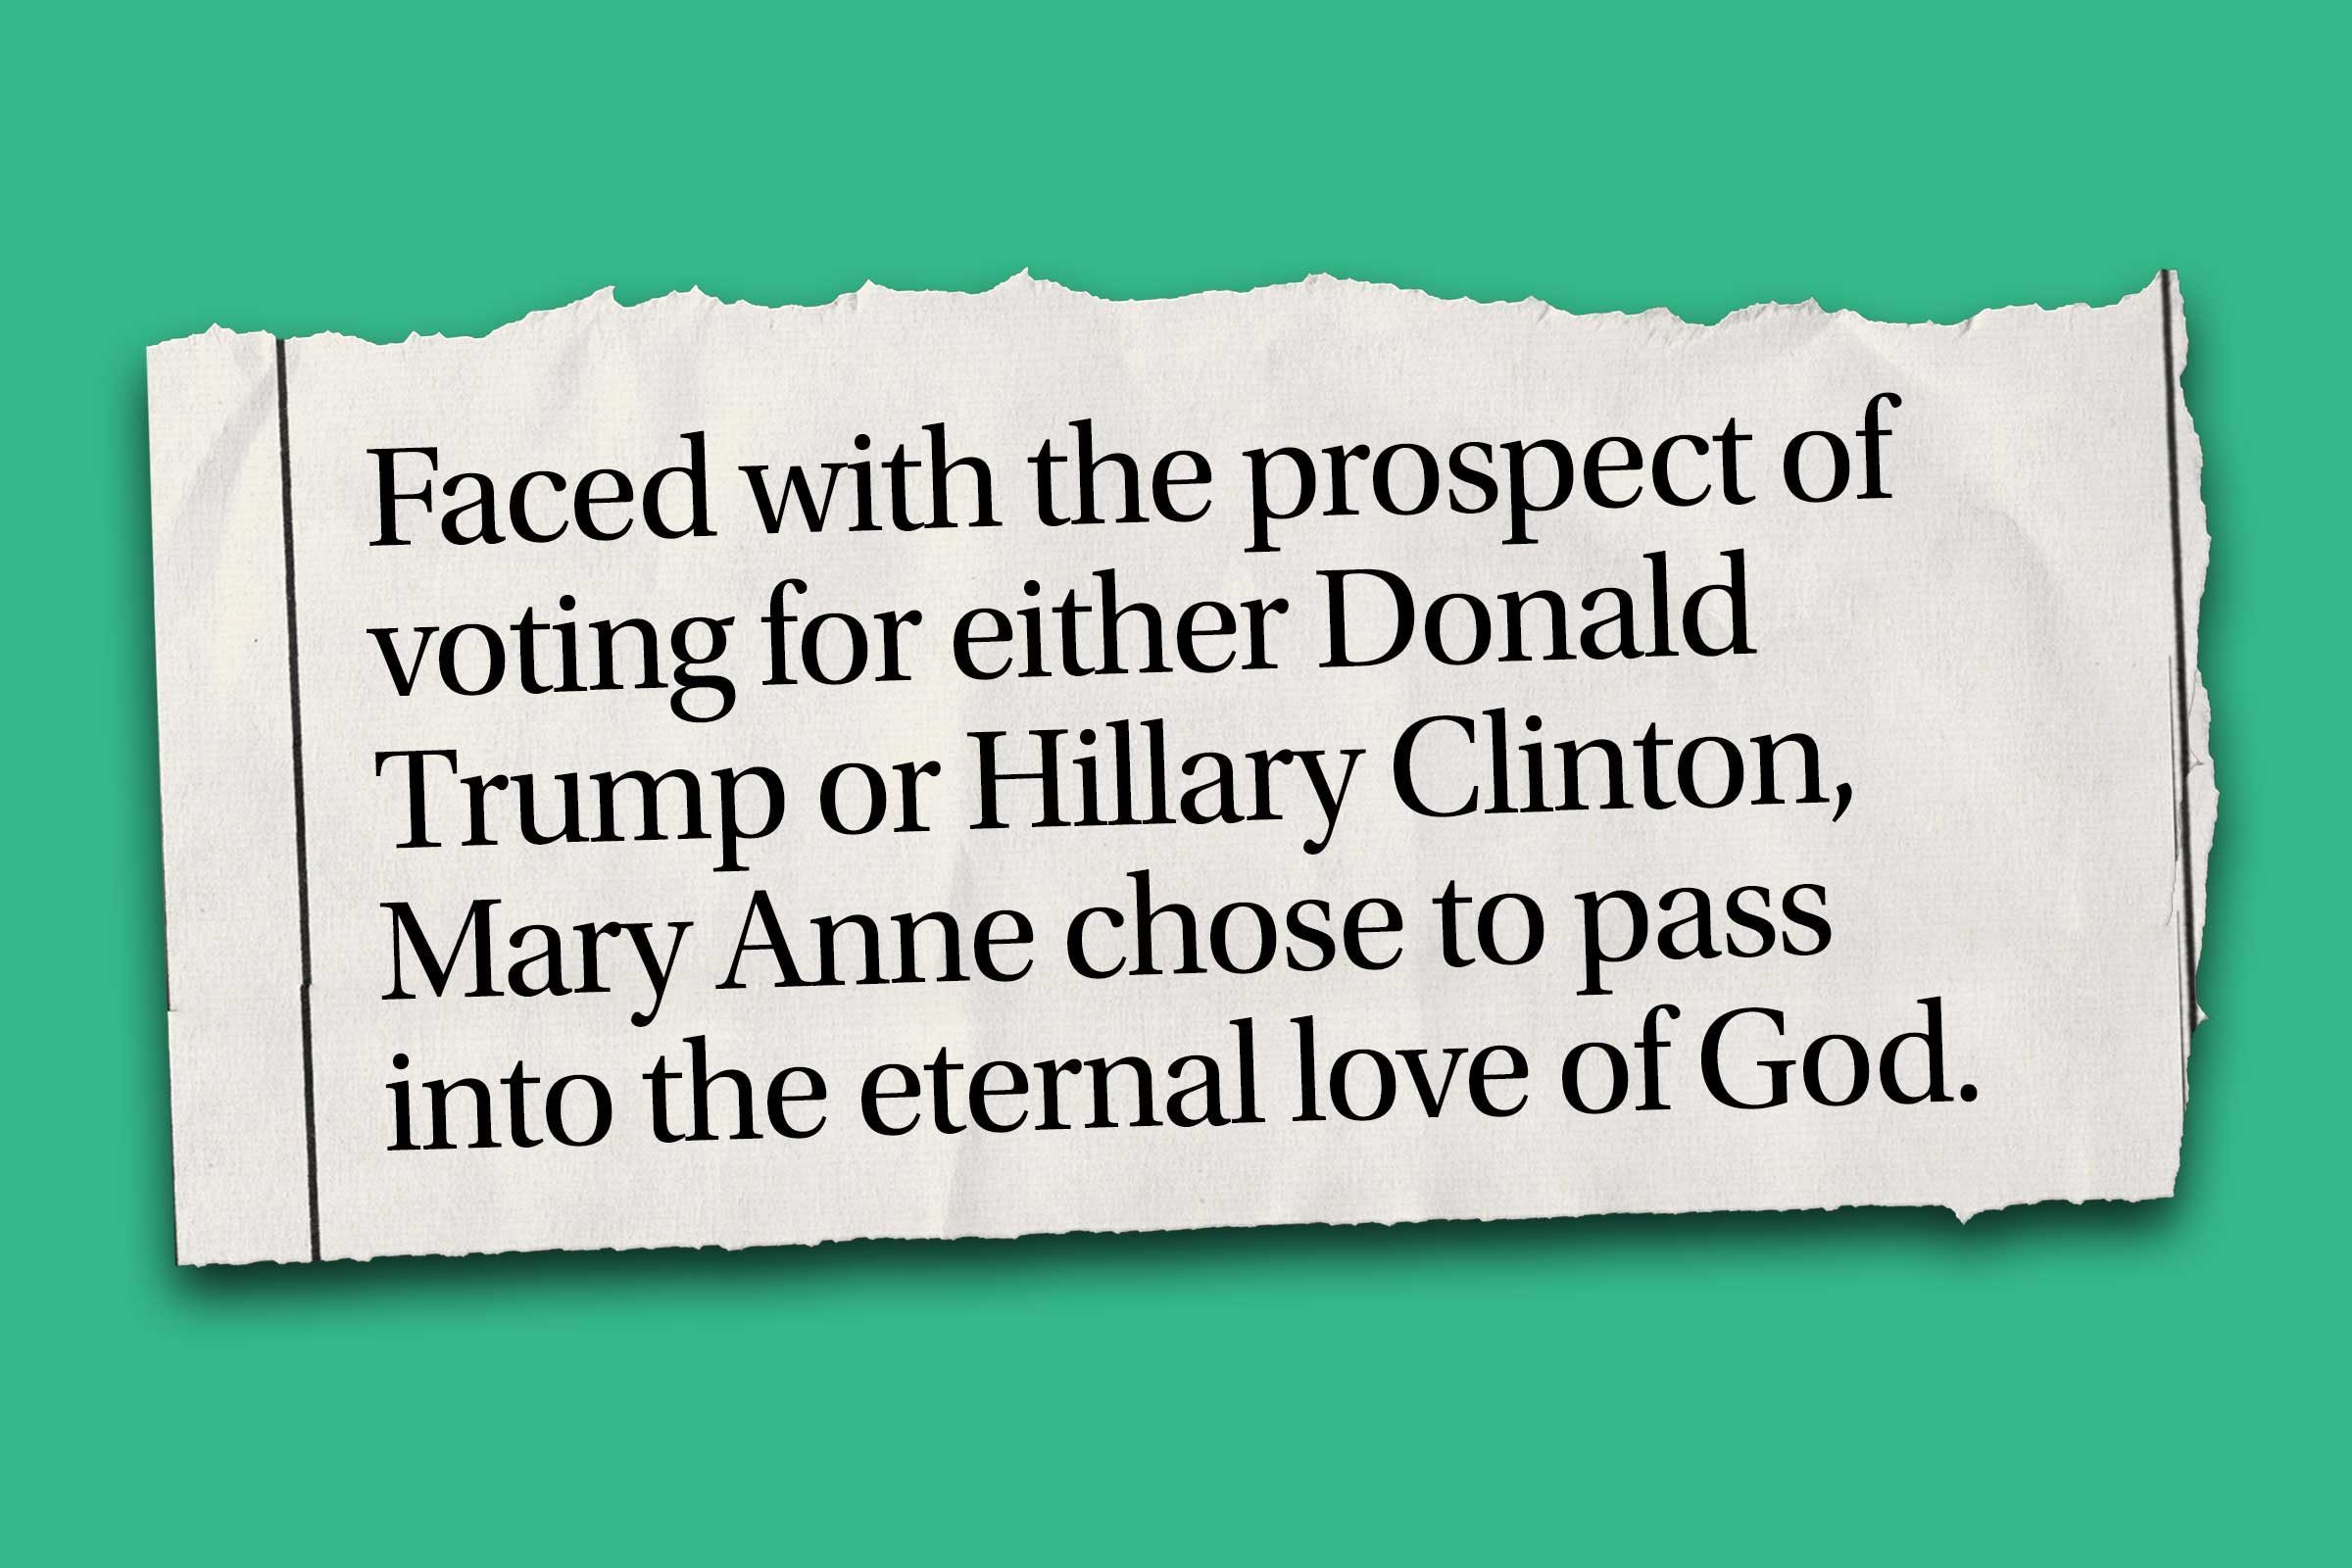 Funniest obituaries that really exist - Faced with the prospect of voting for either Donald Trump or Hillary Clinton, Mary Anne chose to pass into the eternal love of God.